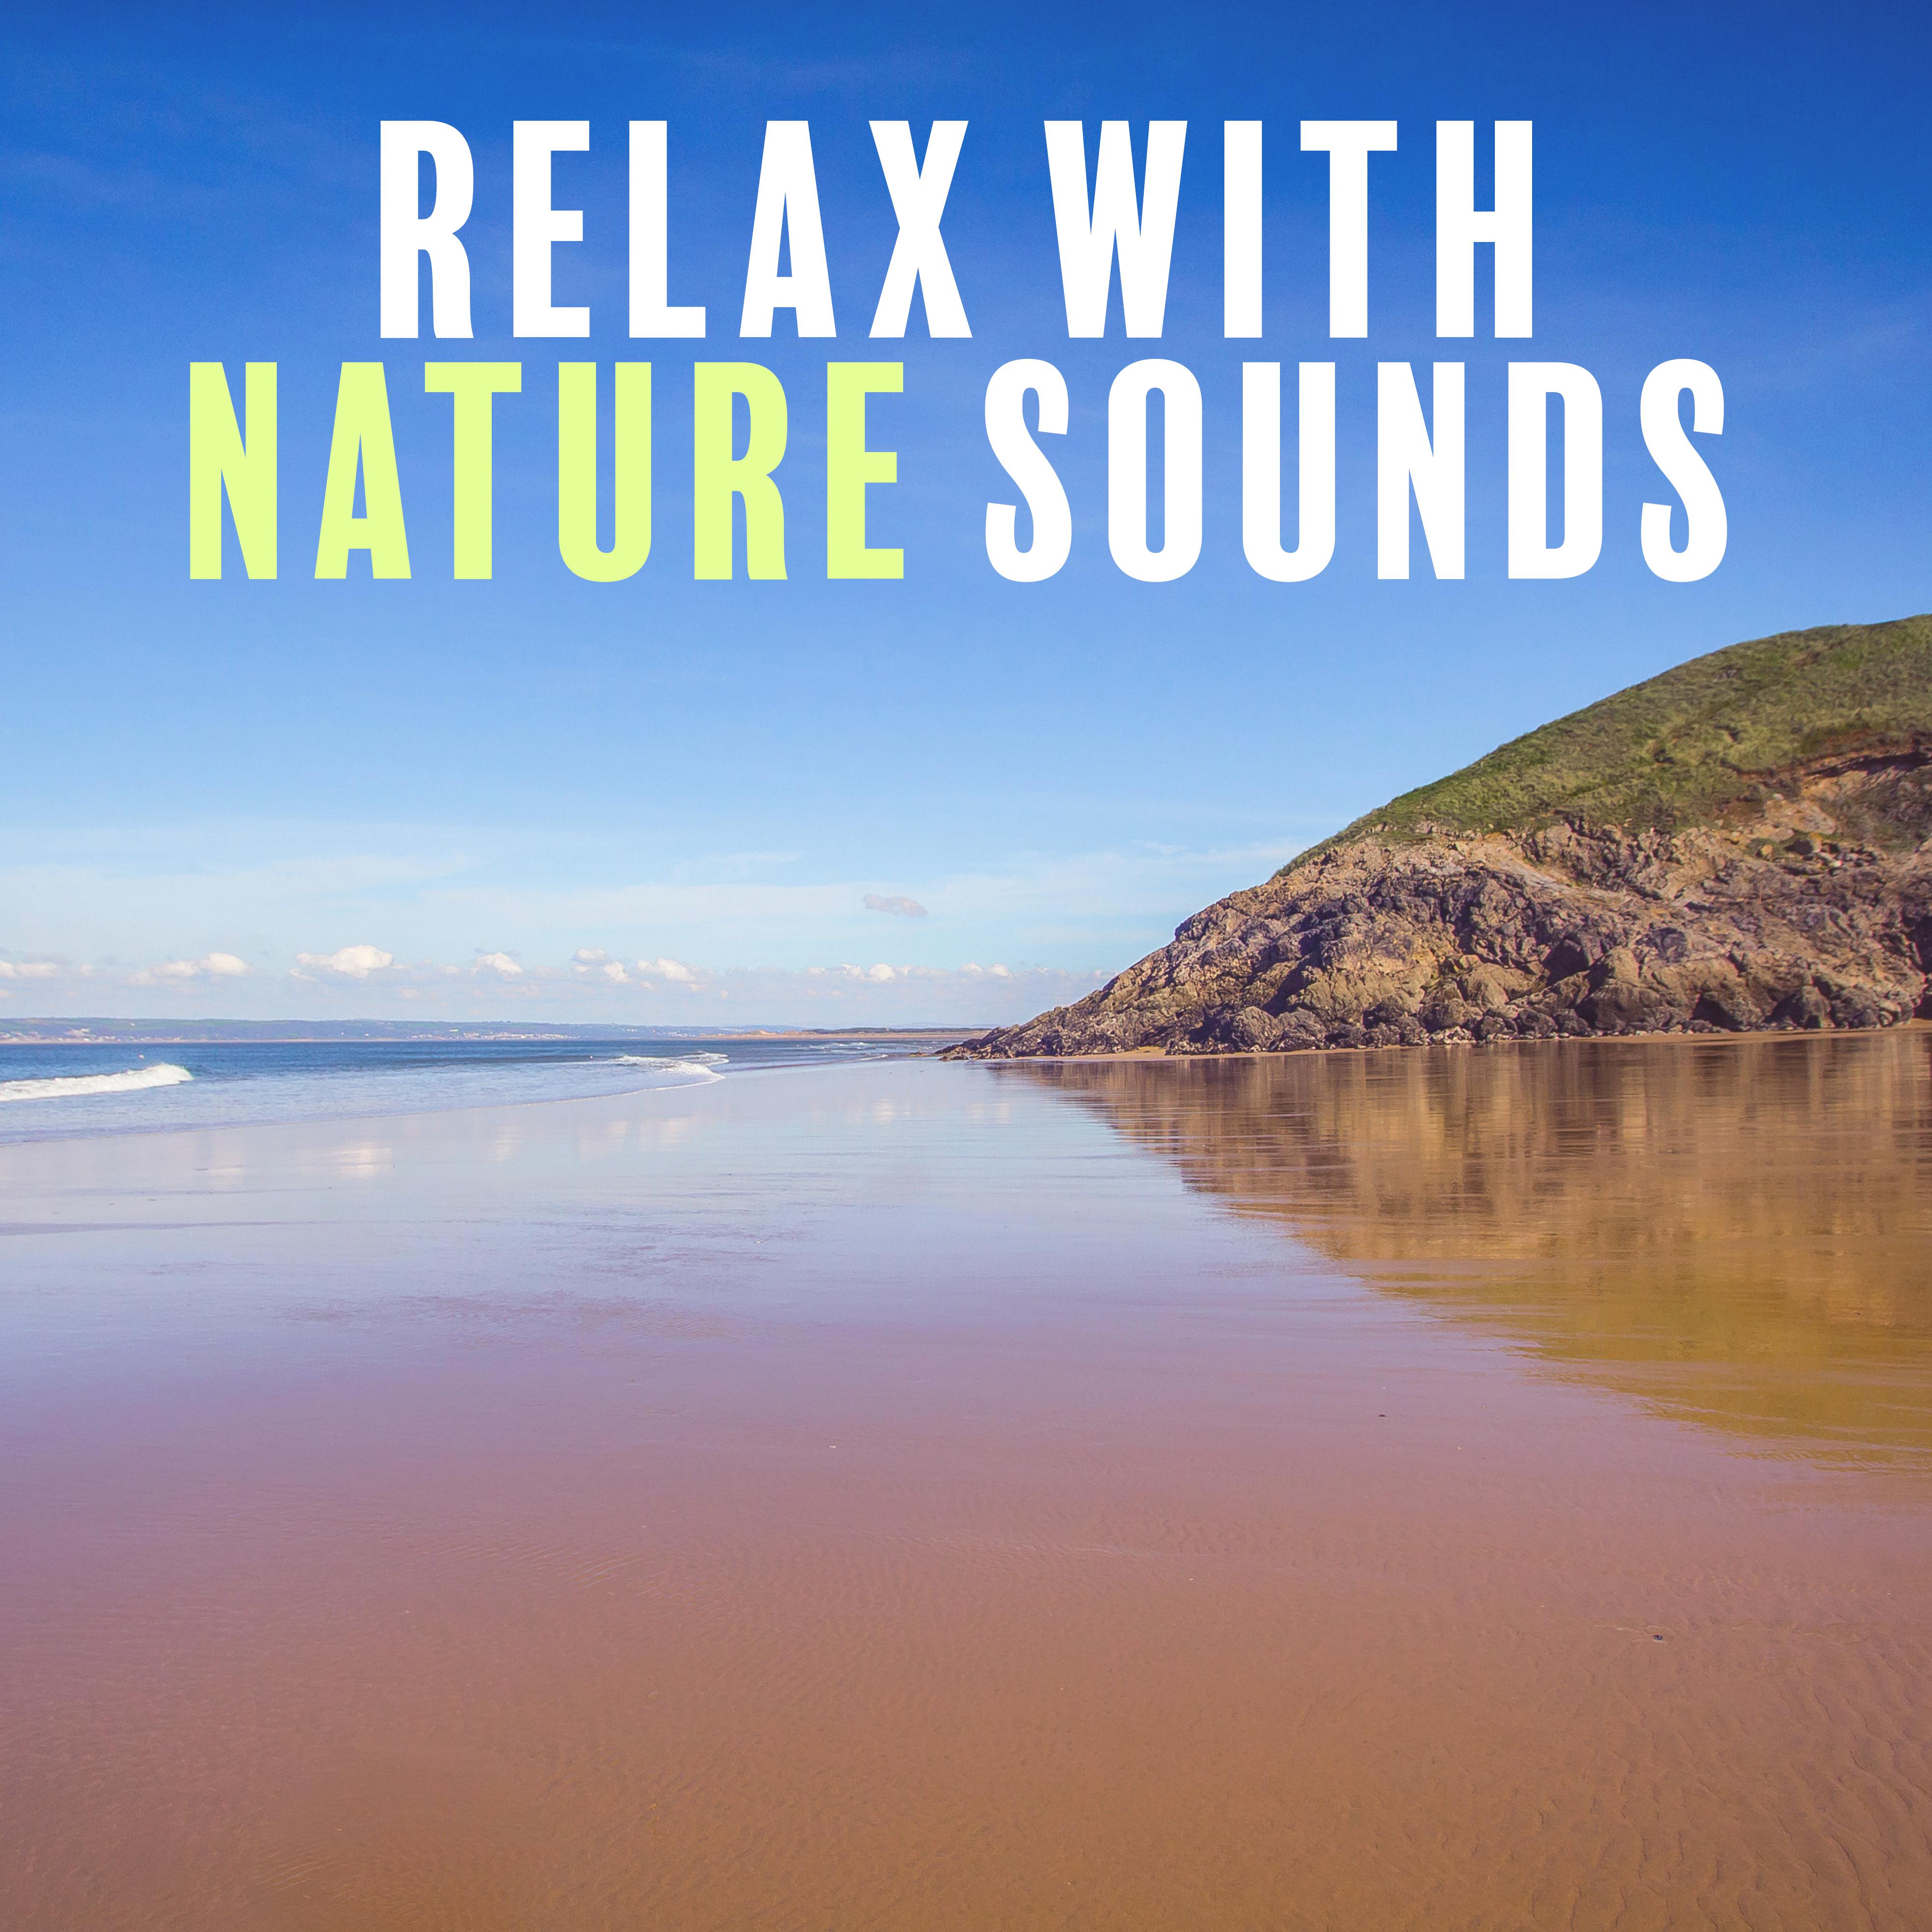 Relax with Nature Sounds  Waves of Calmness, Peaceful Music, Nature Sounds to Stress Relief, New Age Music